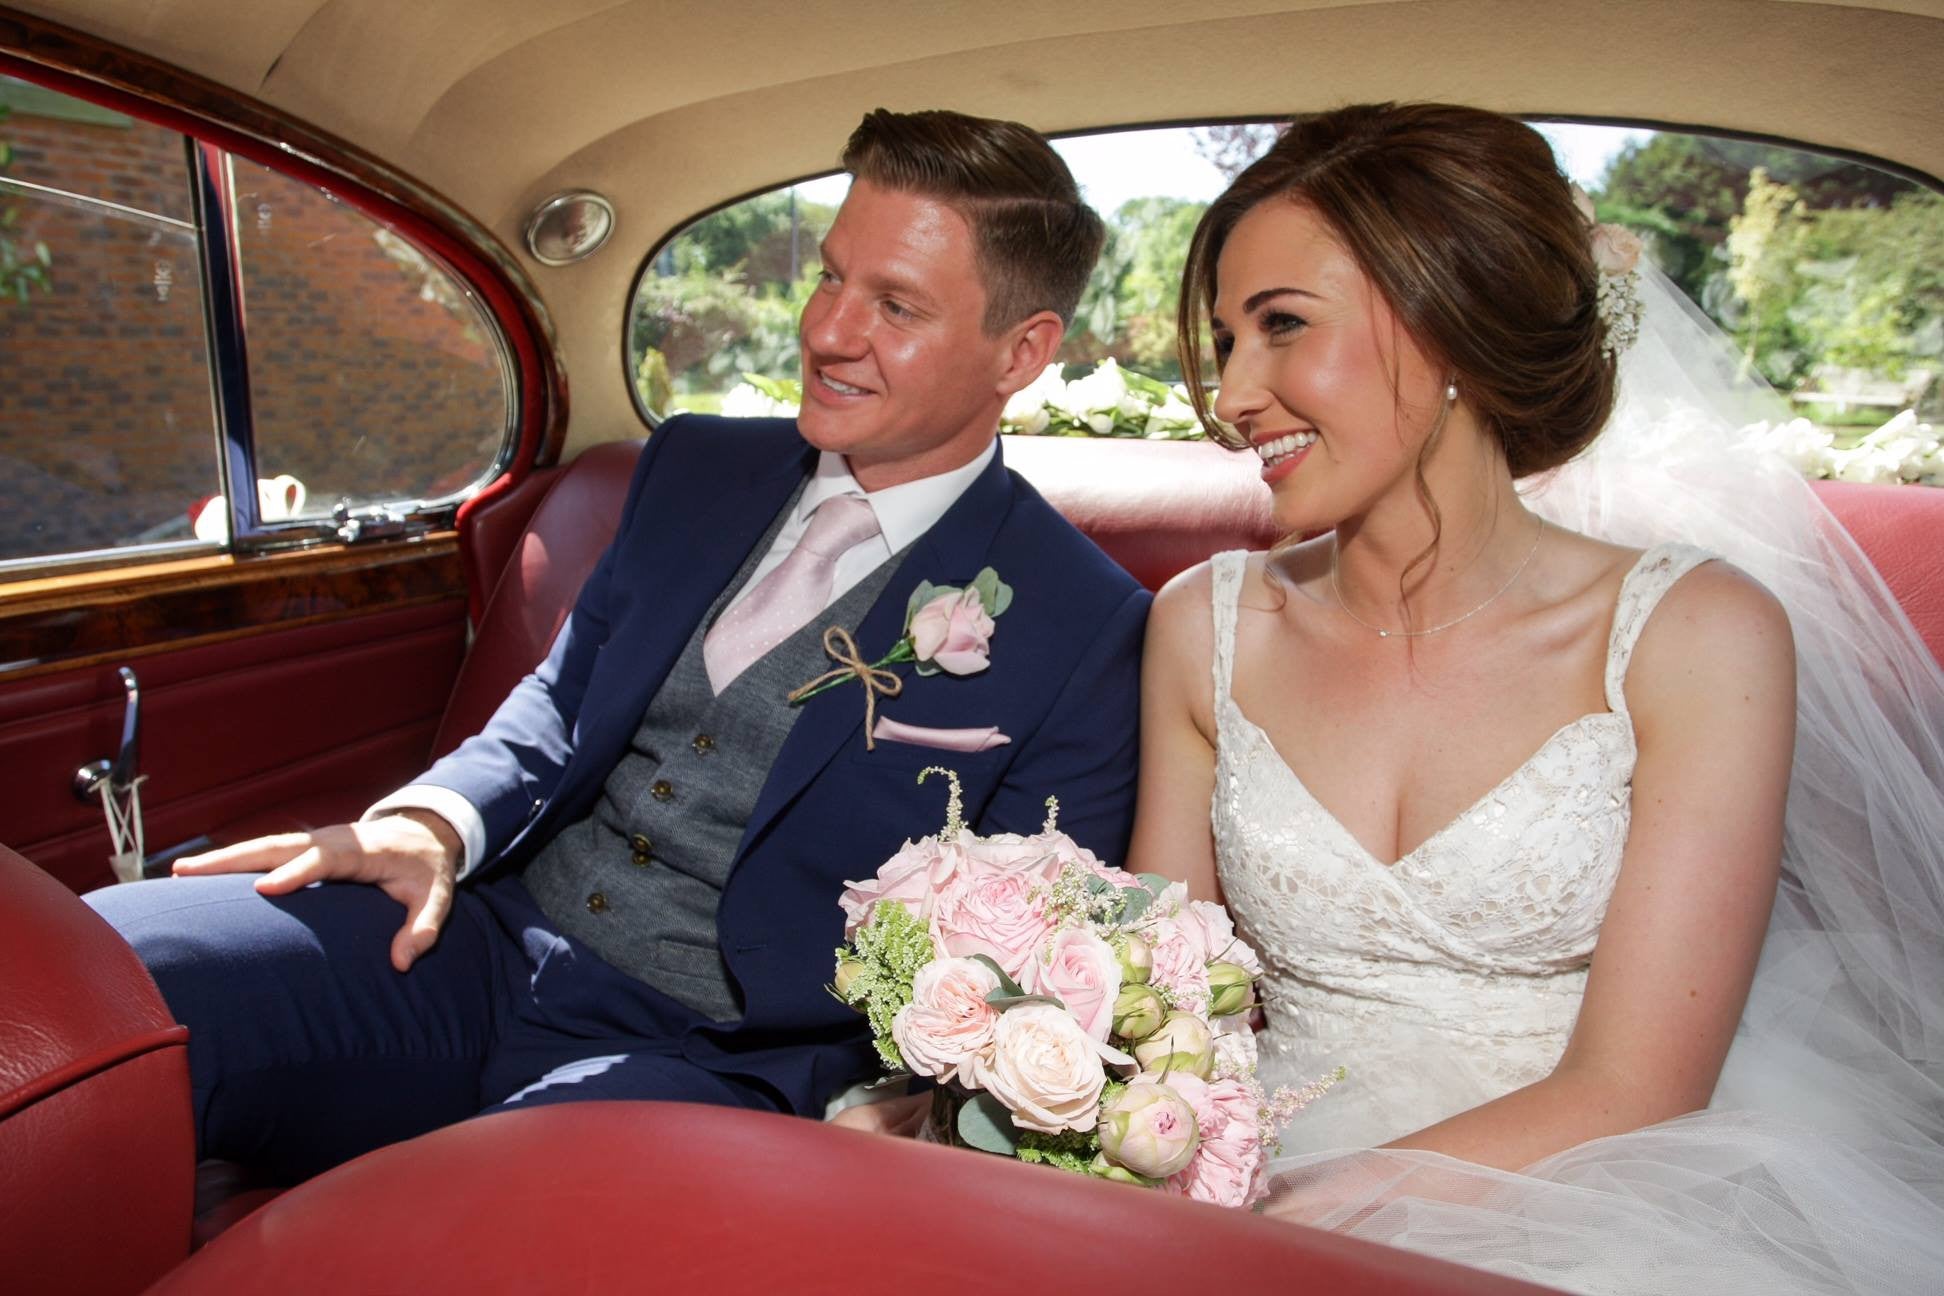 Bride and Groom in the wedding car with pink Rose bouquet and buttonhole.